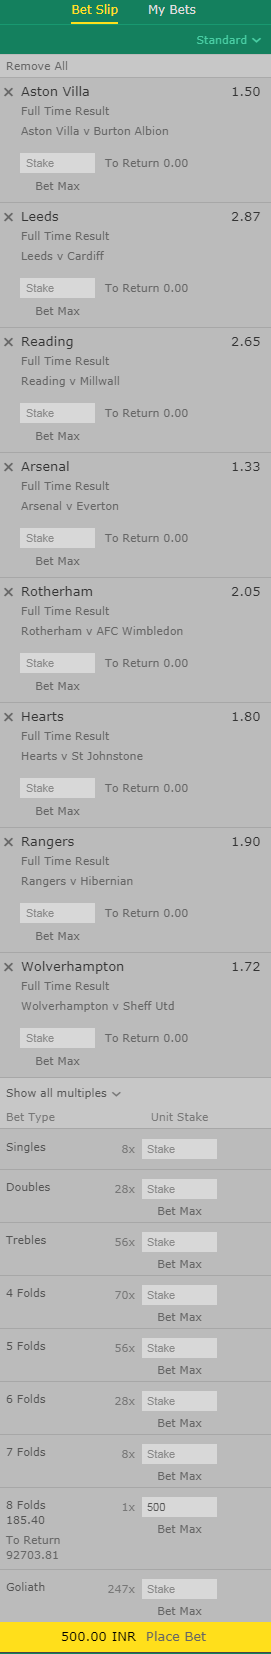 big odds daily tips